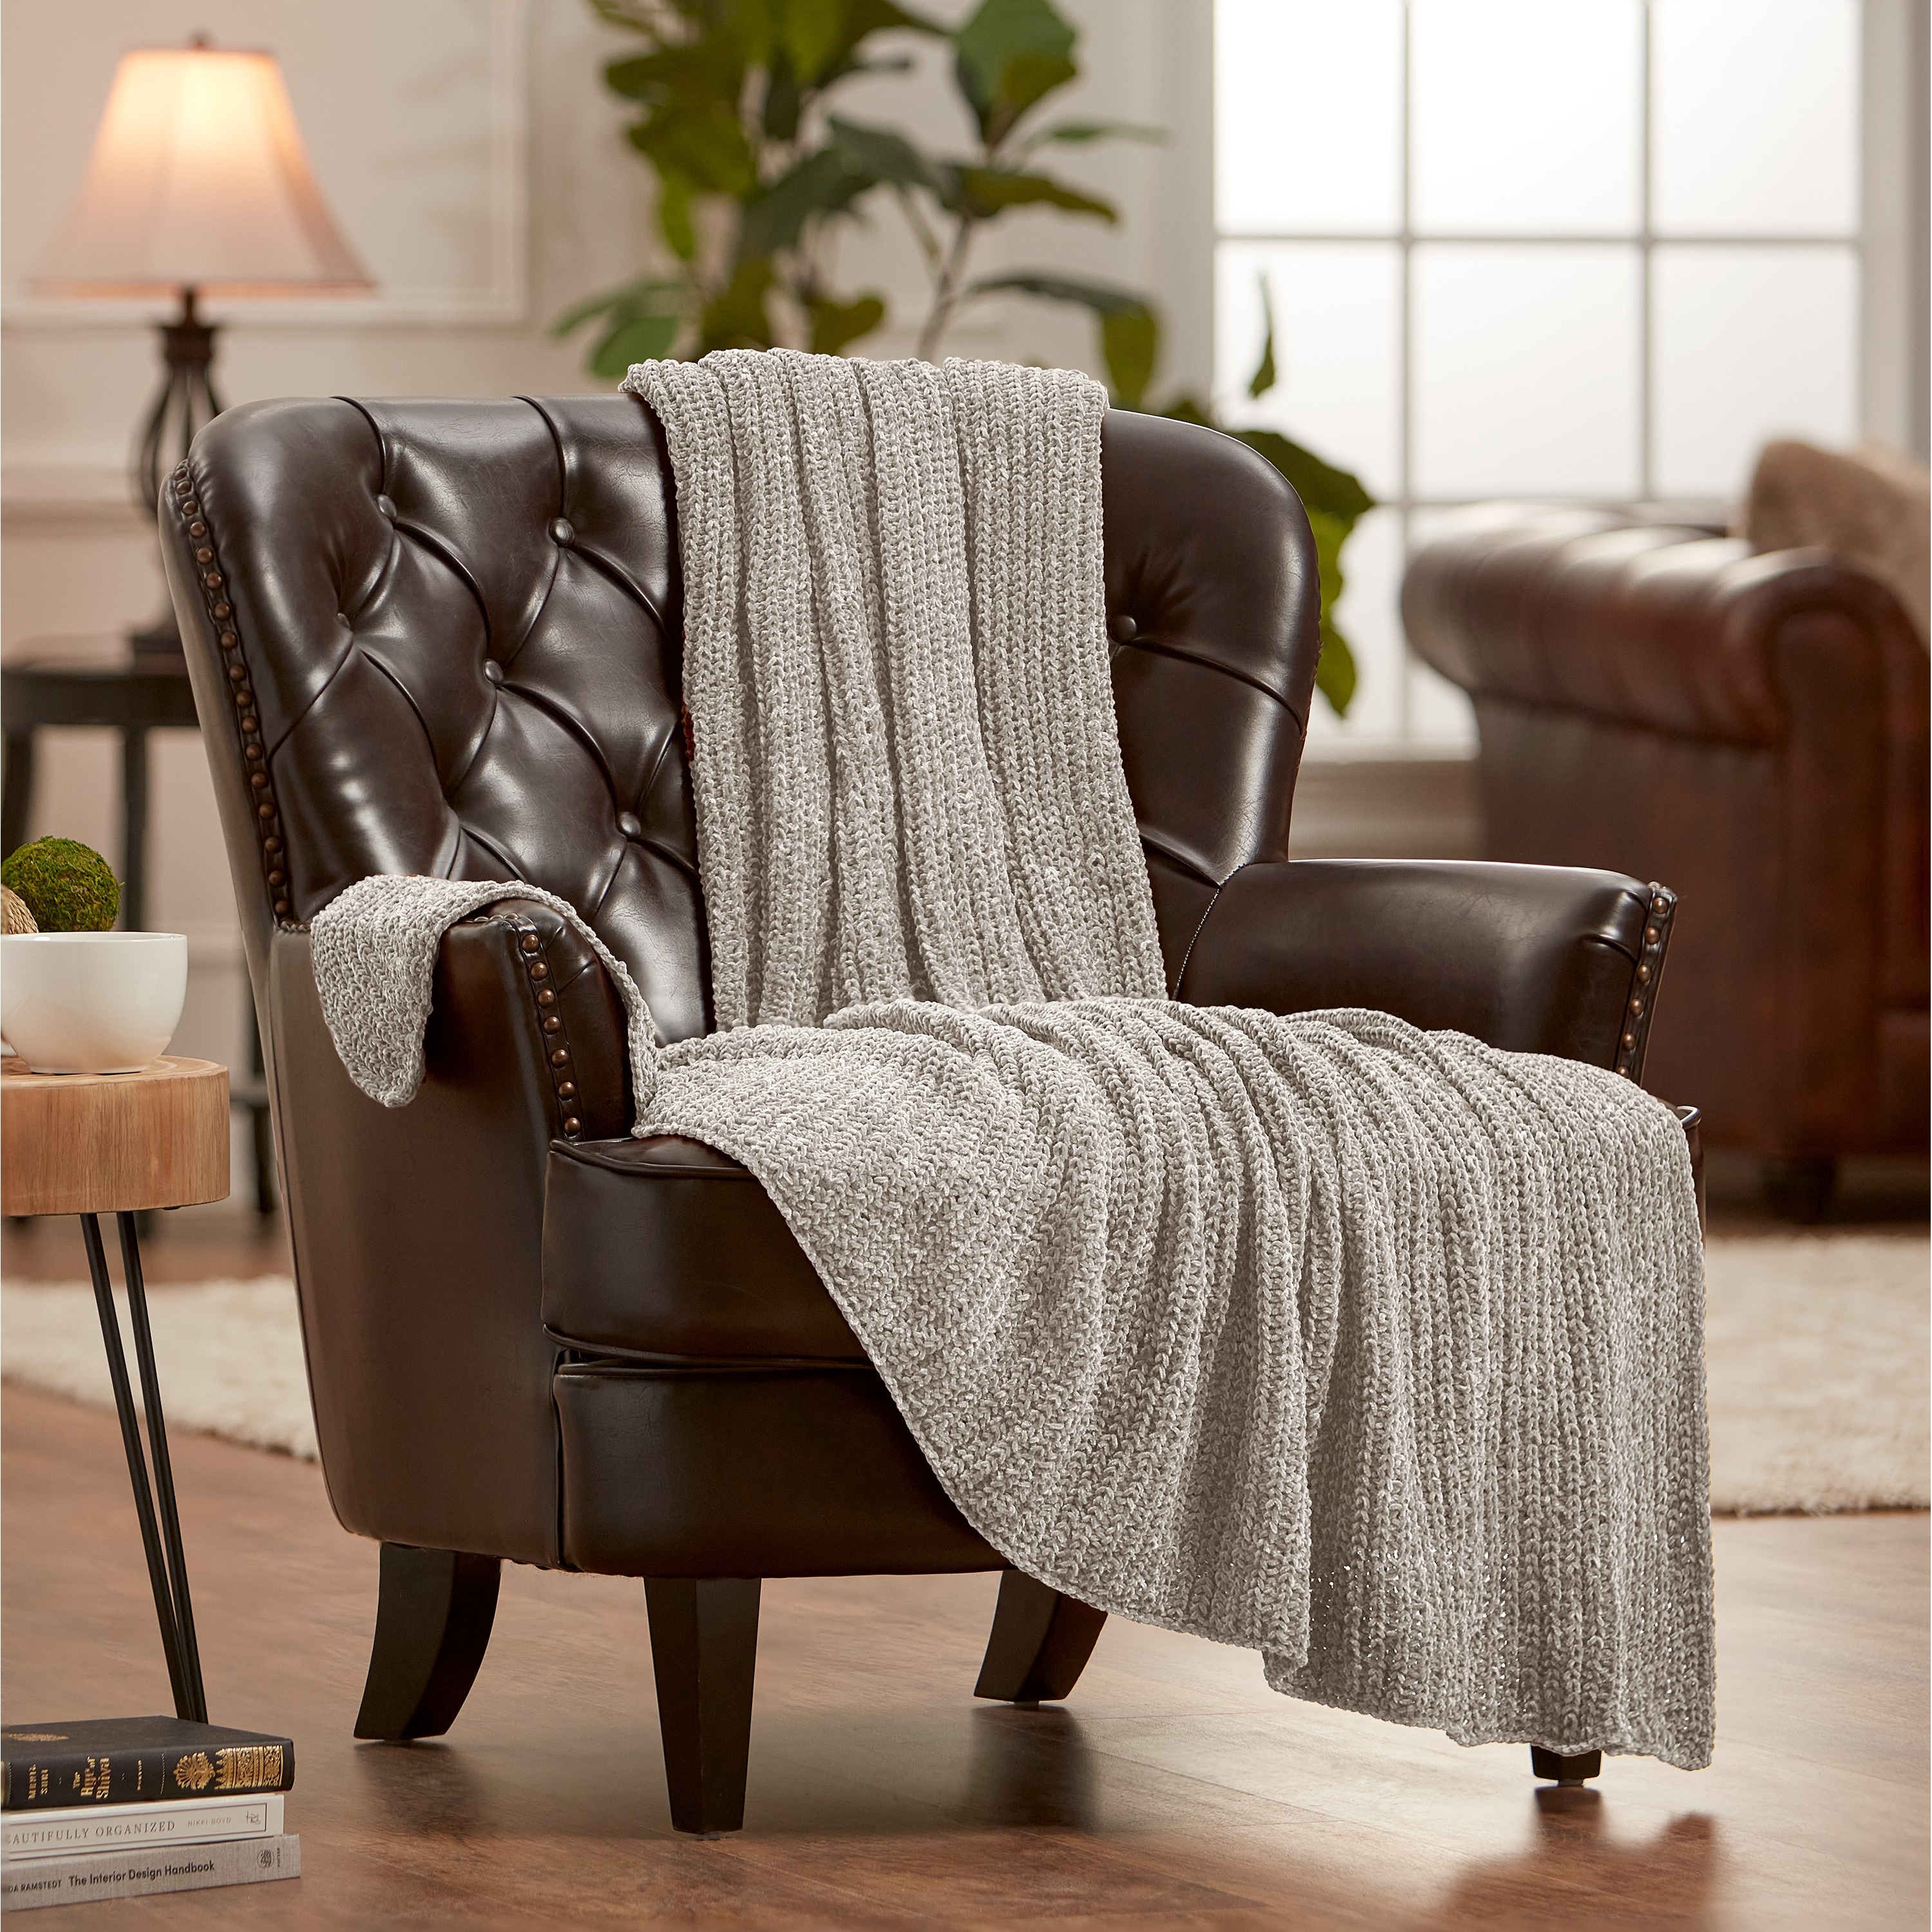 Knit Blankets and Throws  Shop our Best Blankets Deals Online at